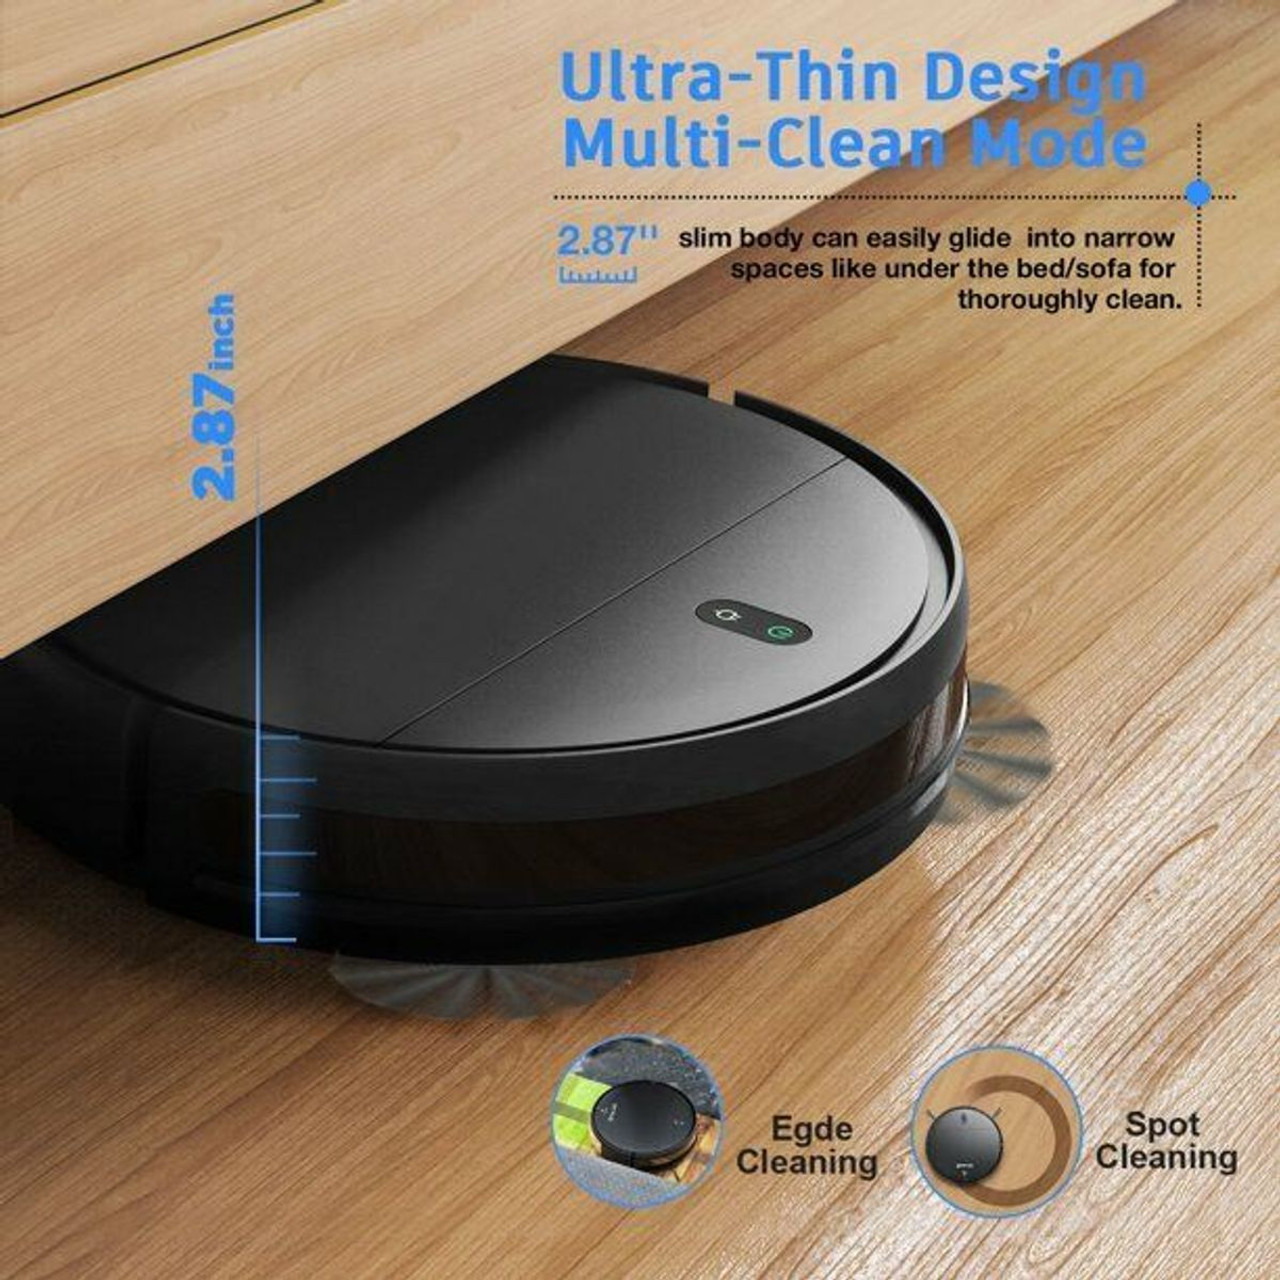 GTTVO BR150 Robot Vacuum Cleaner Mop 2 in 1 Mopping - Black product image